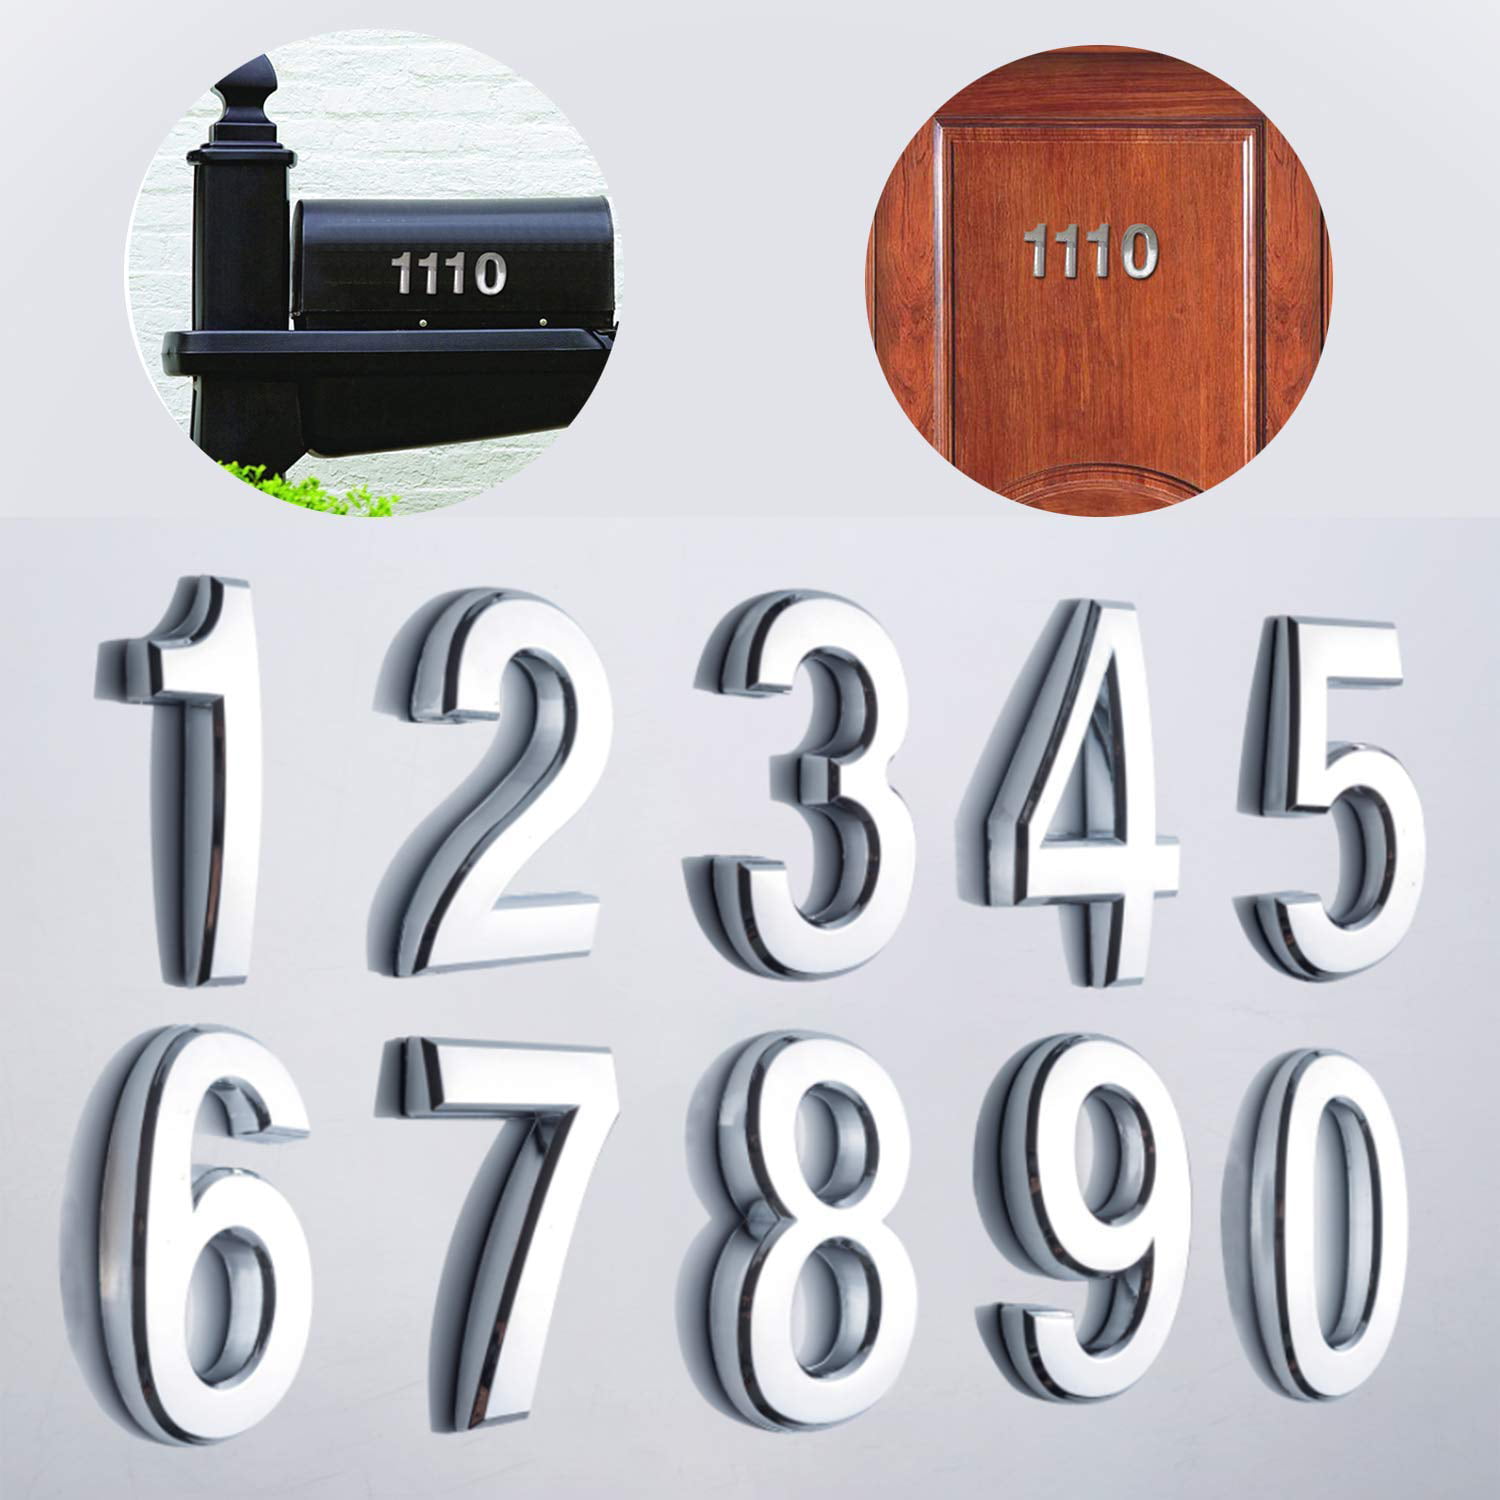 Mailbox Numbers Self-Stick Address Signs for Apartments,4 Pieces,Bronze Letter A-D 2.75 Inch Adhesive House Numbers Street Door Numbers